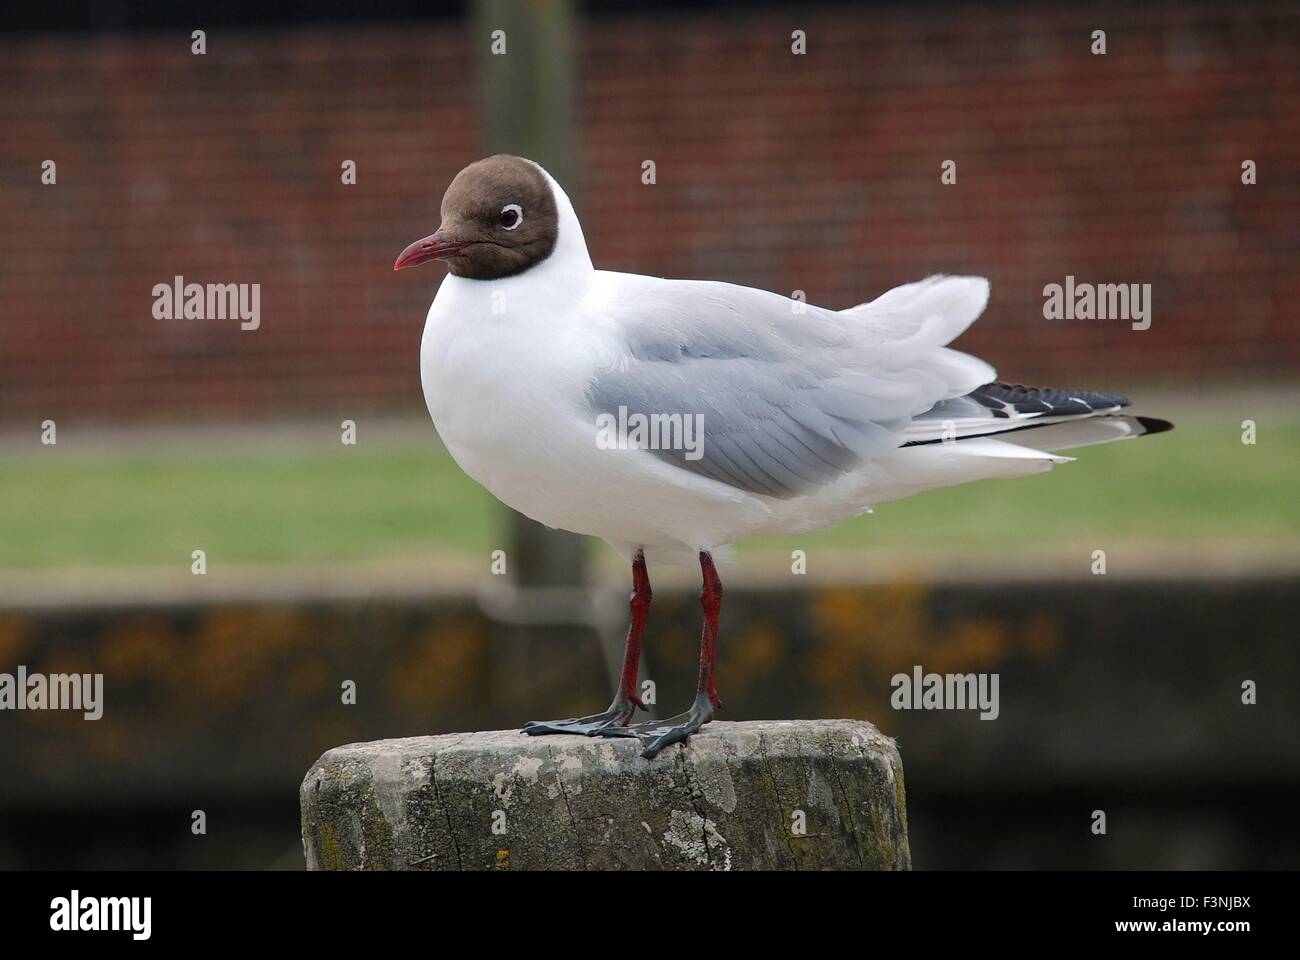 A Black Headed Gull (Chroicocephalus Ridibundus) perched on a wooden post at The Strand at Rye in East Sussex, England. Stock Photo